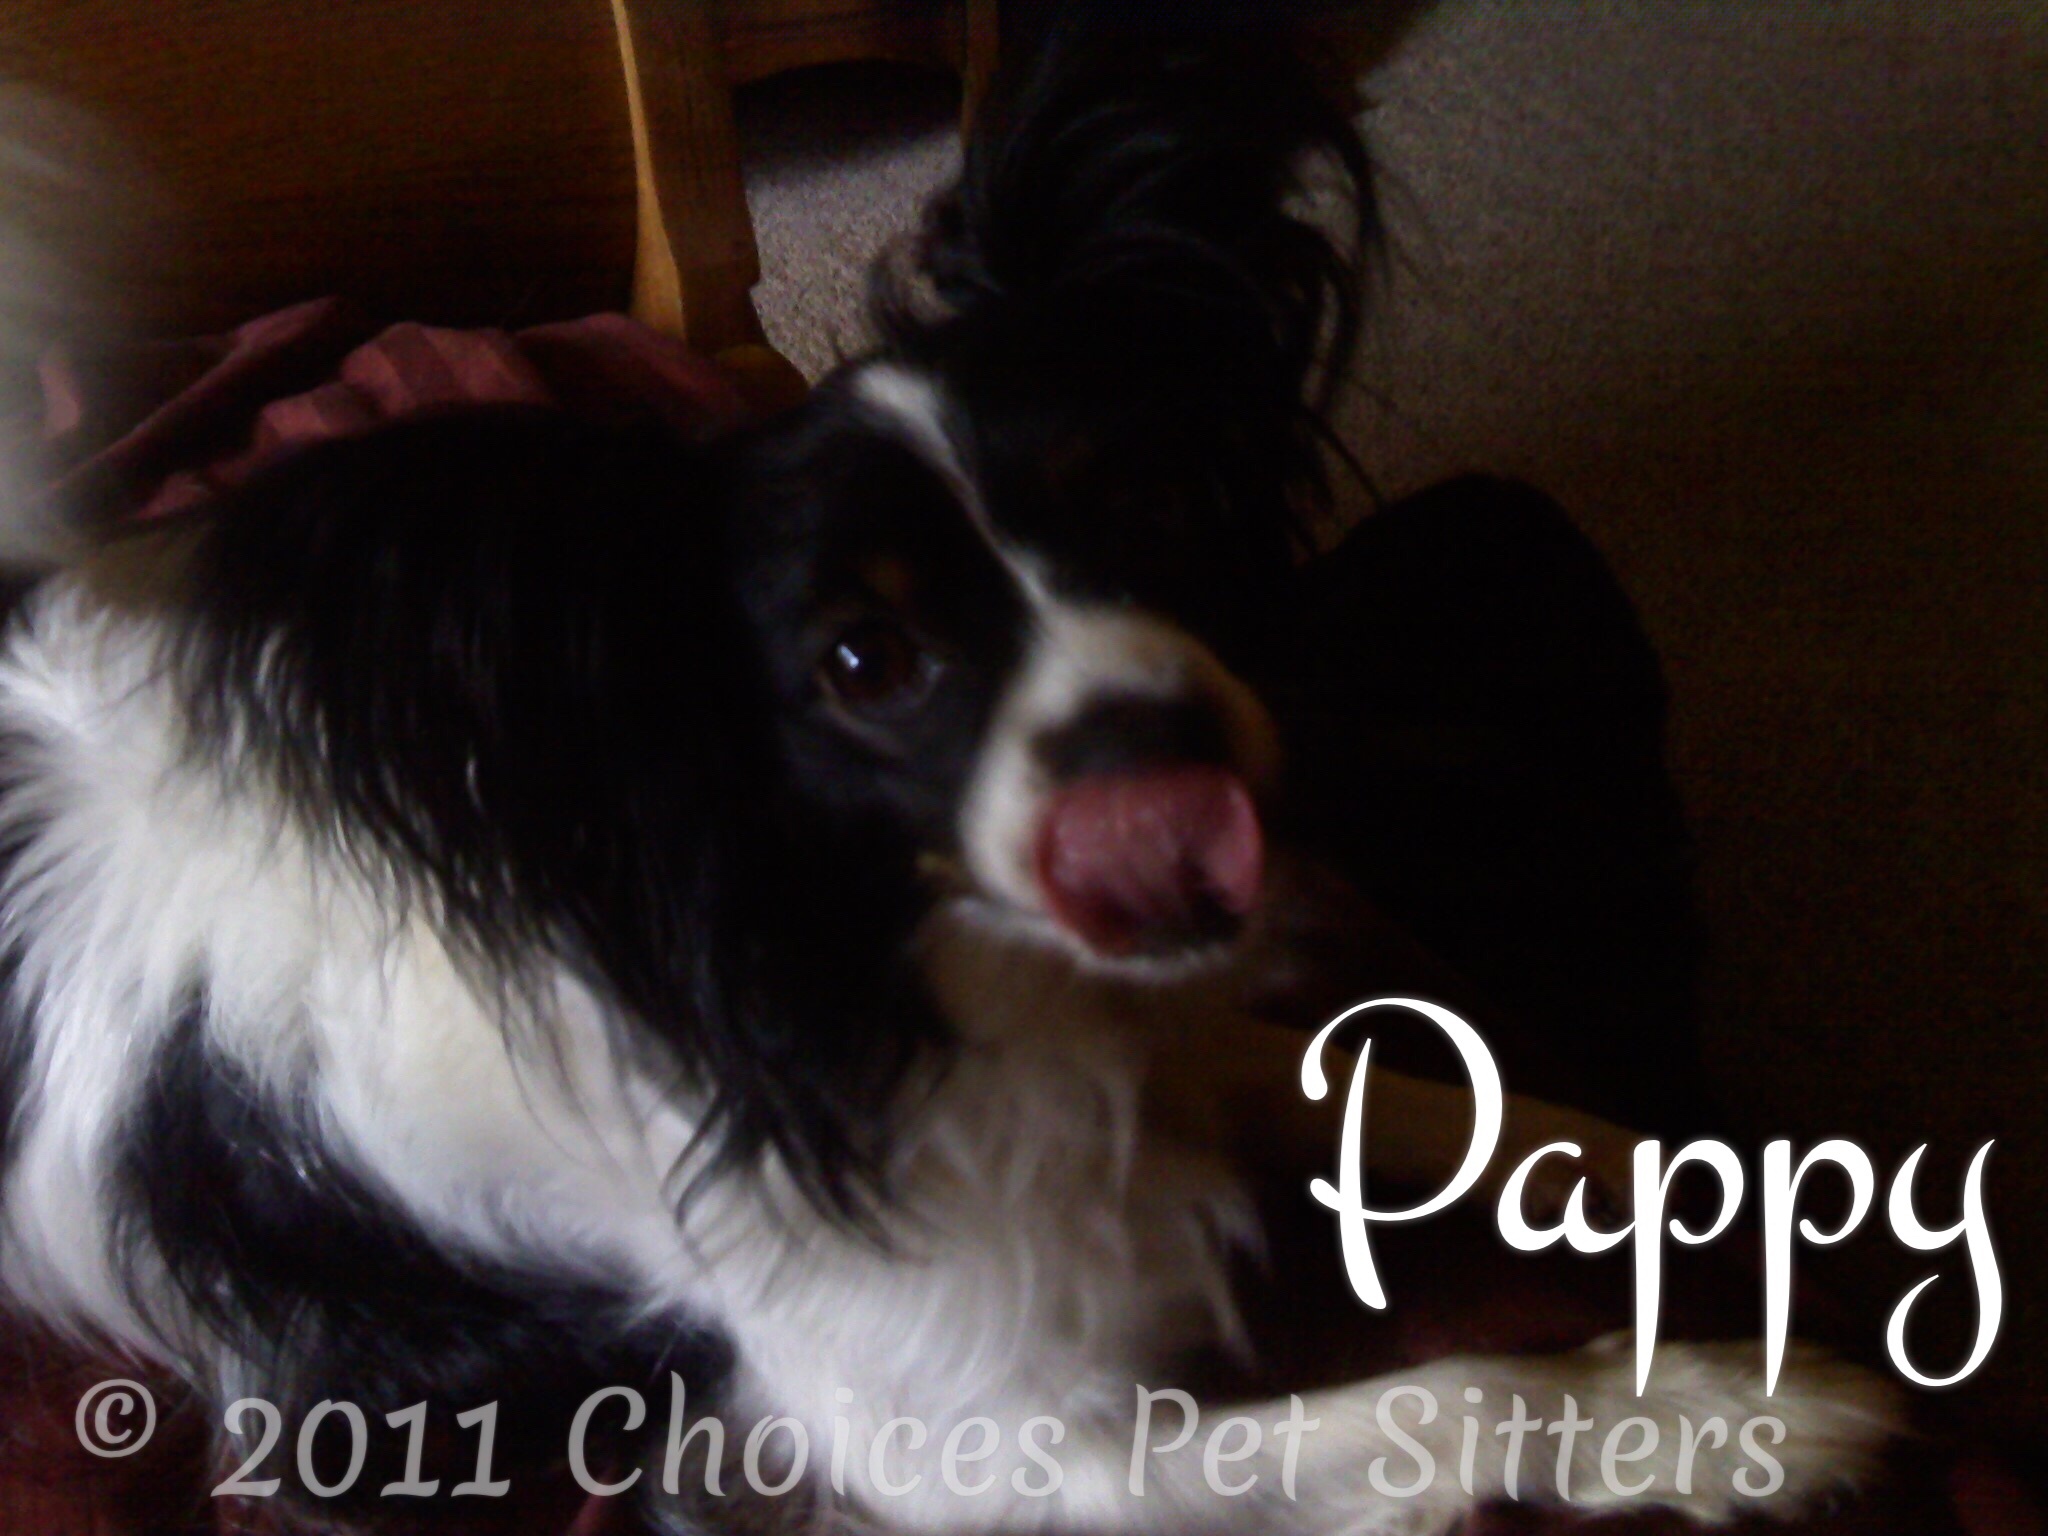 Choices Pet Sitters - Pappy